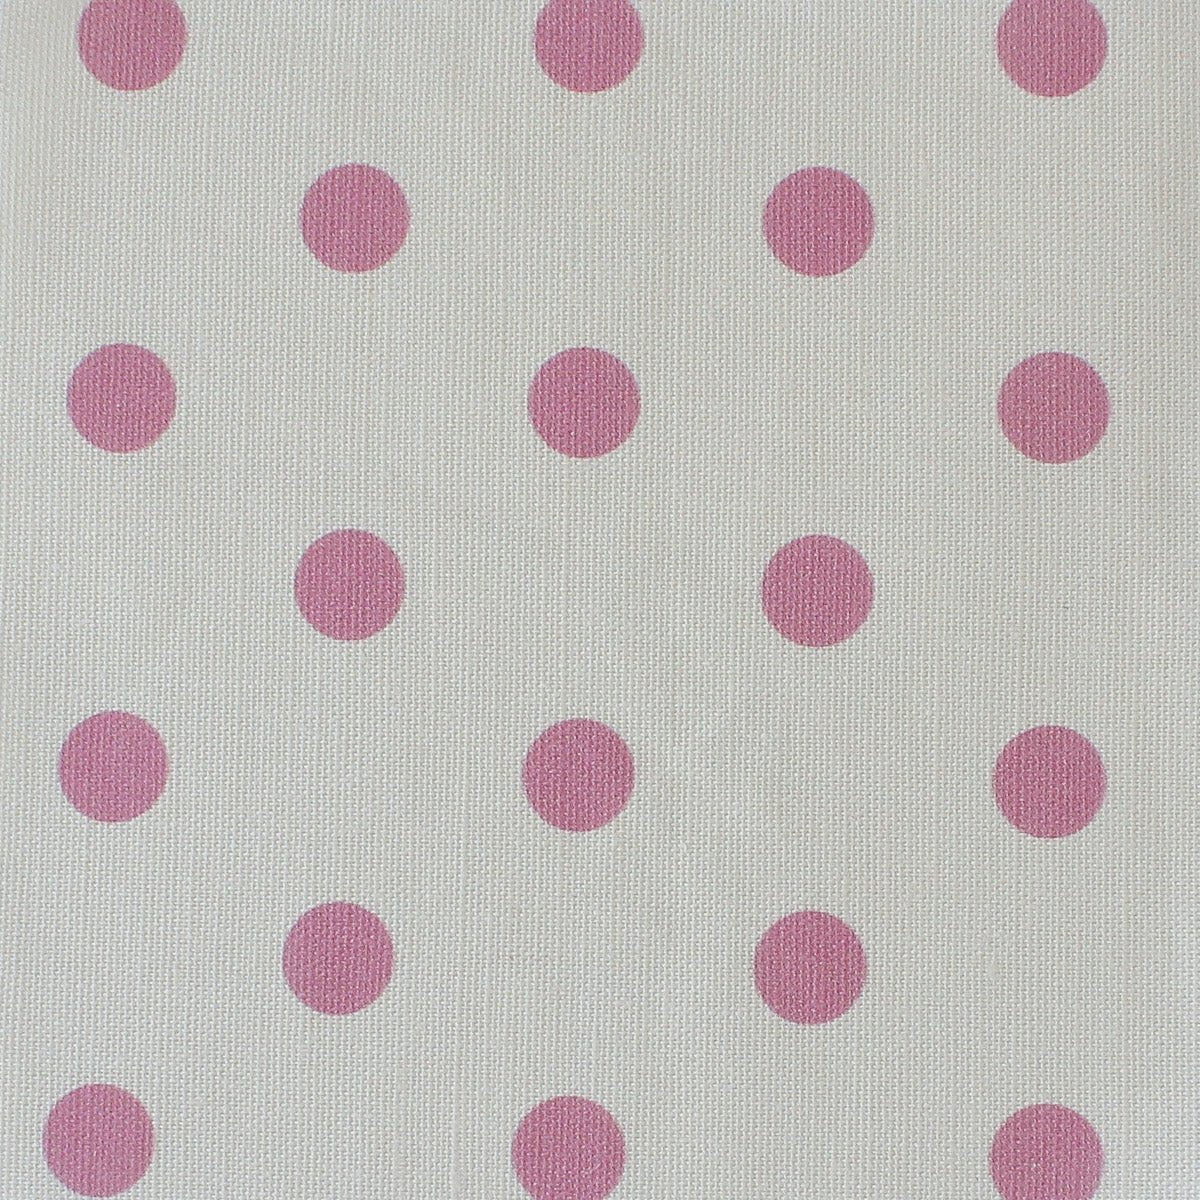 Spotty Day Fabric - Tickled Pink - Hydrangea Lane Home